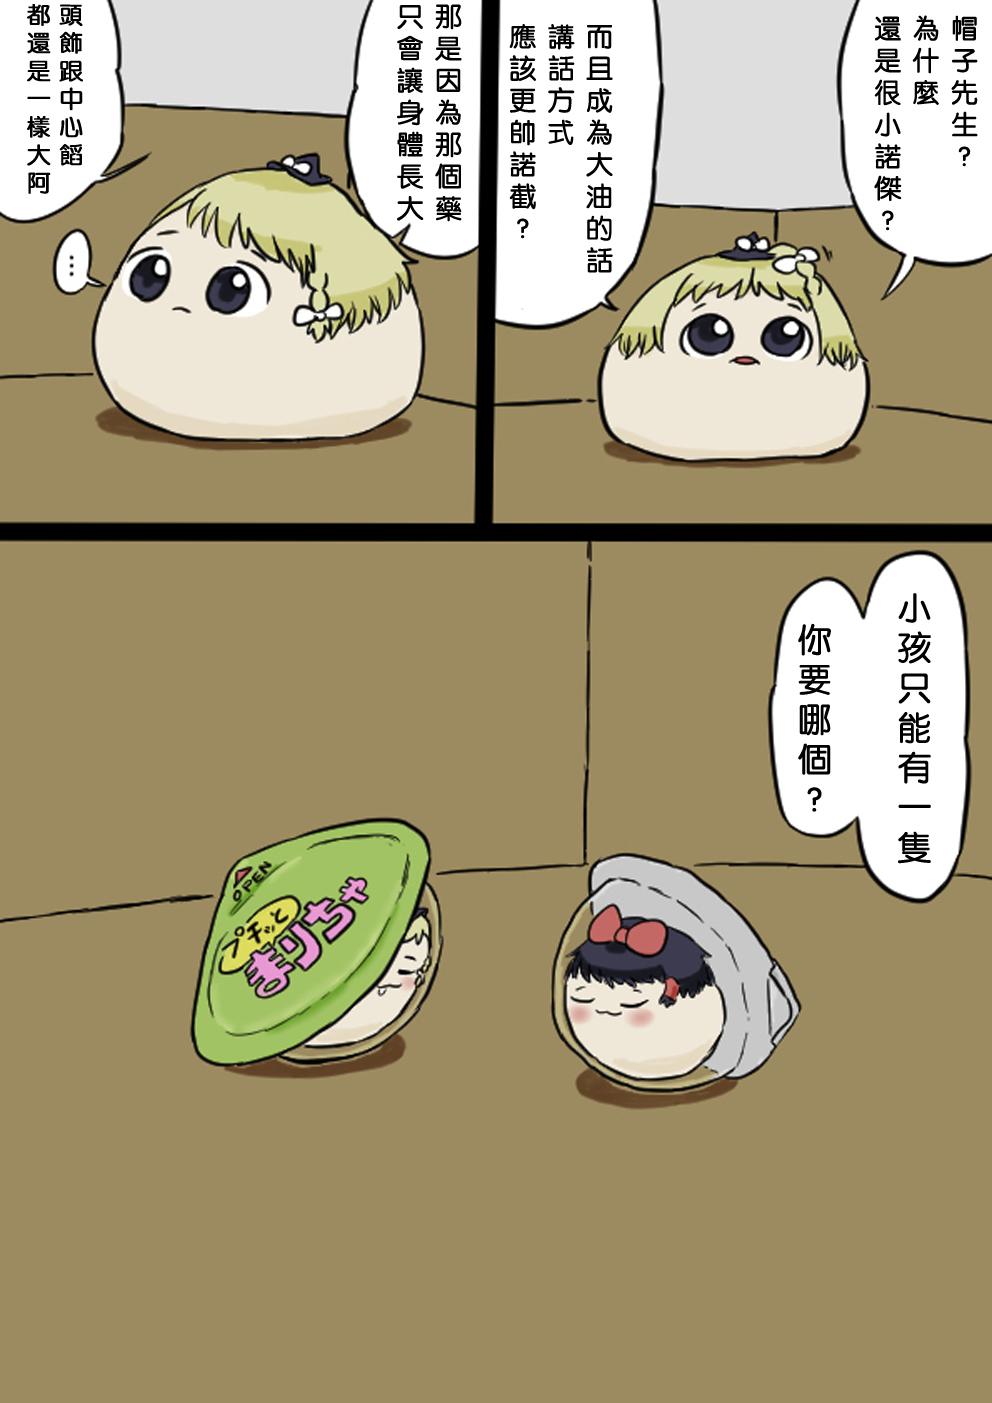 Safadinha すべてをてにいれたまりちゃ（Chinese） - Touhou project Ghetto - Page 11